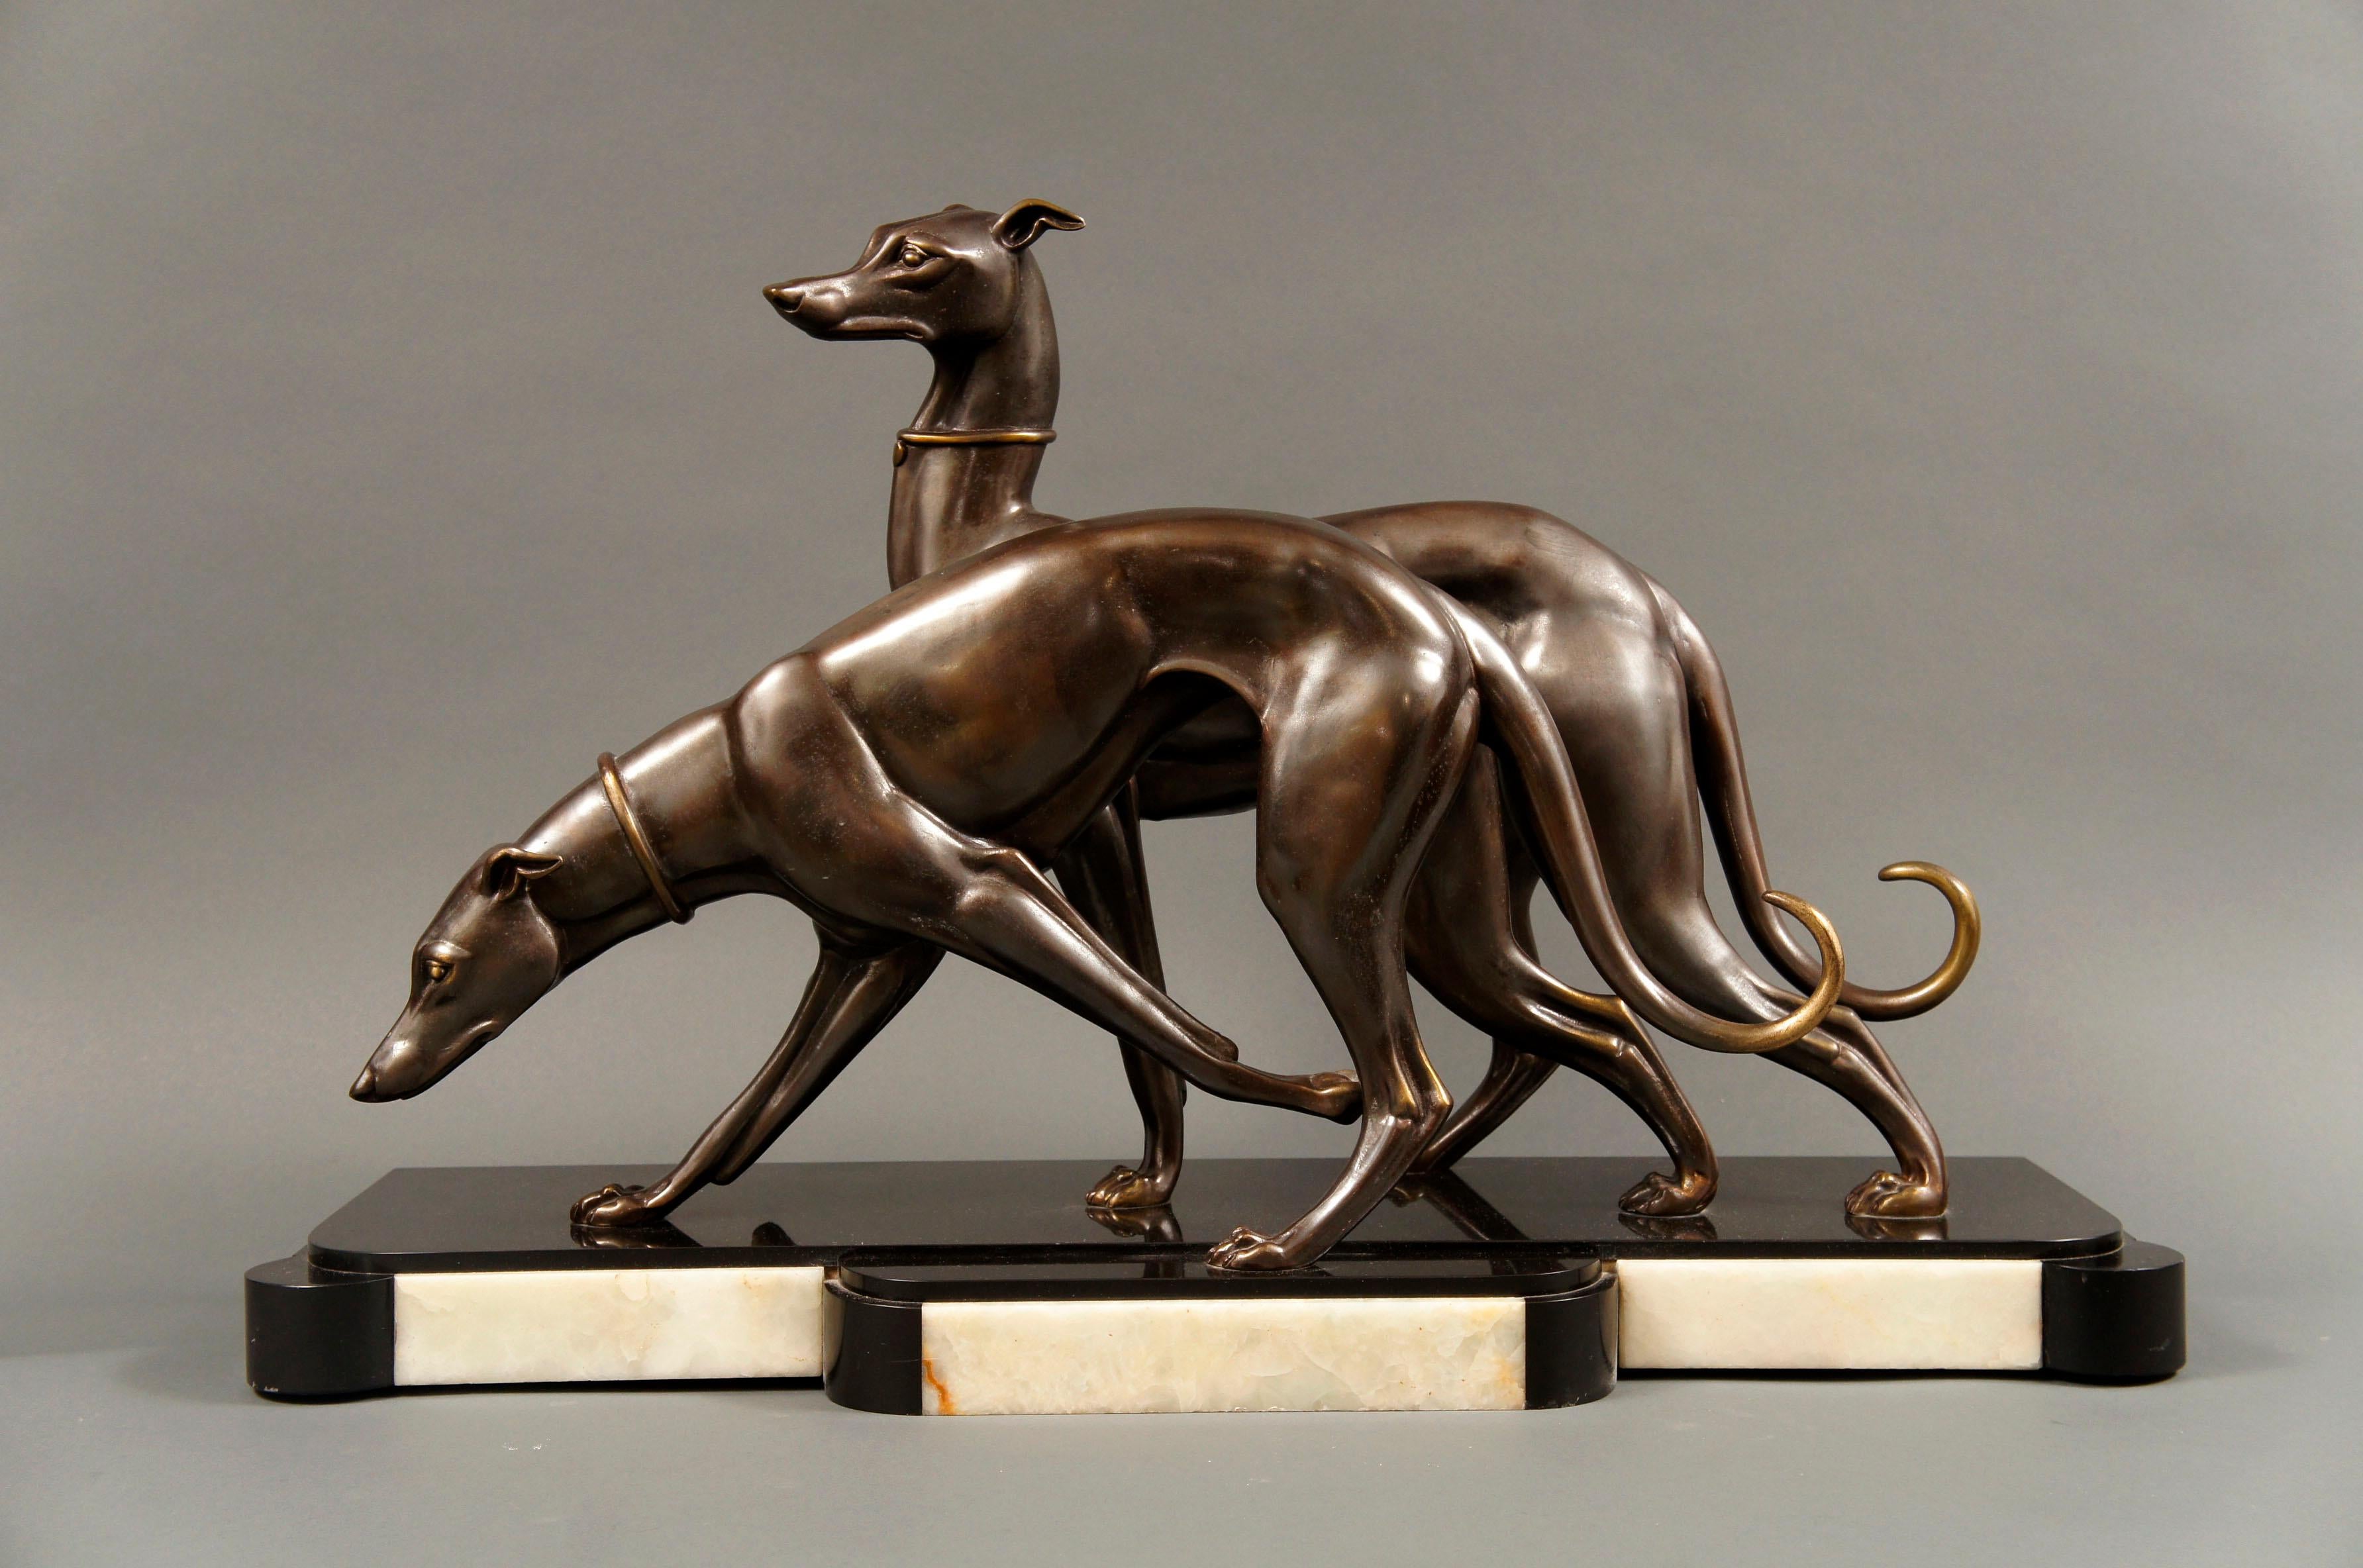 A very fine and well defined bronze sculpture set on a marble base by renowned French sculptor Irénée Rochard (1906-1984). Rochard was born in Villefranche-sur-Saone in 1906 into a family of artists and studied art between 1924 and 1928. He became a